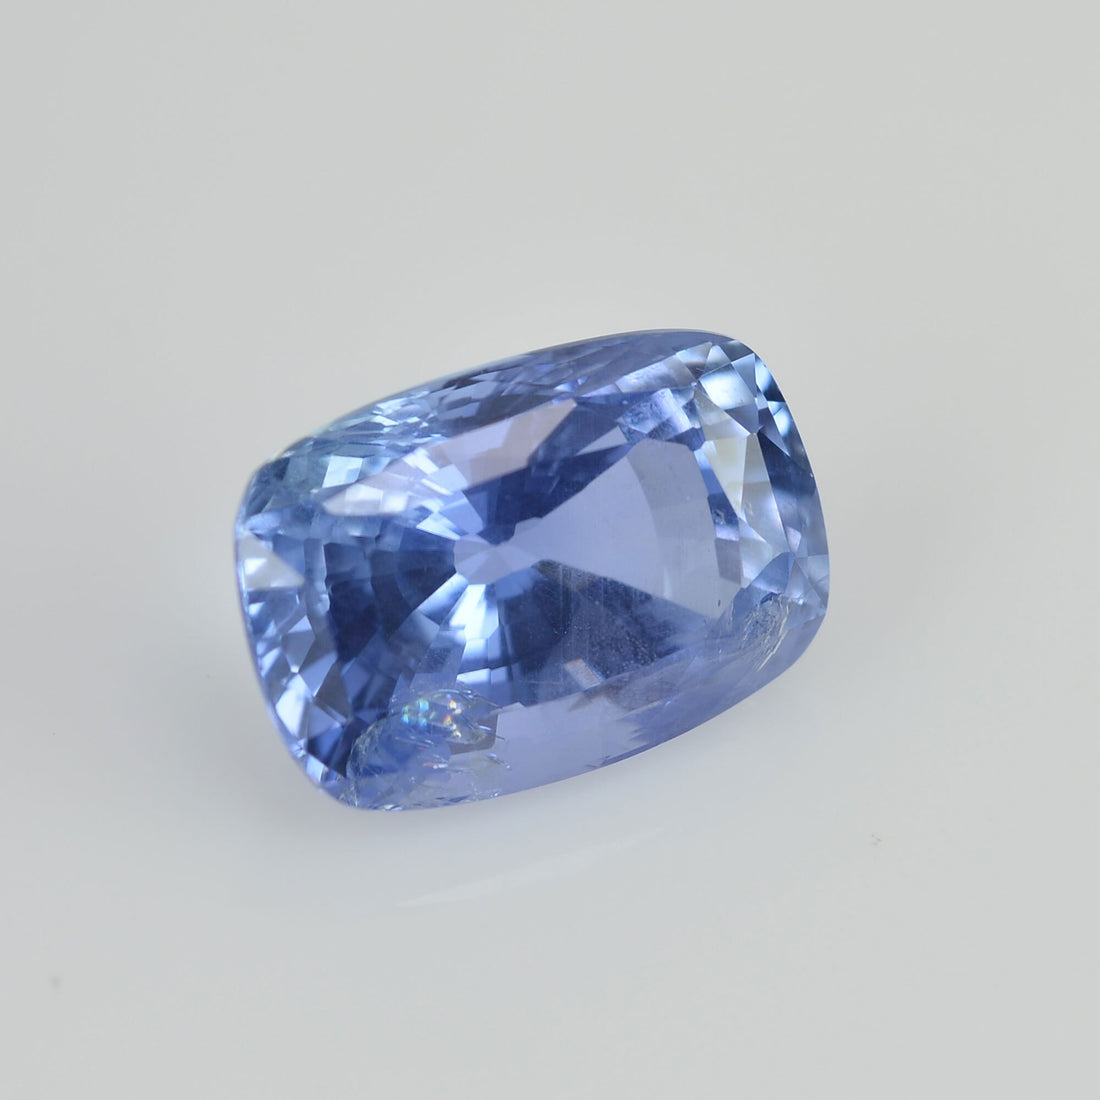 3.25 cts Unheated Natural Blue Sapphire Loose Gemstone Cushion Cut Certified